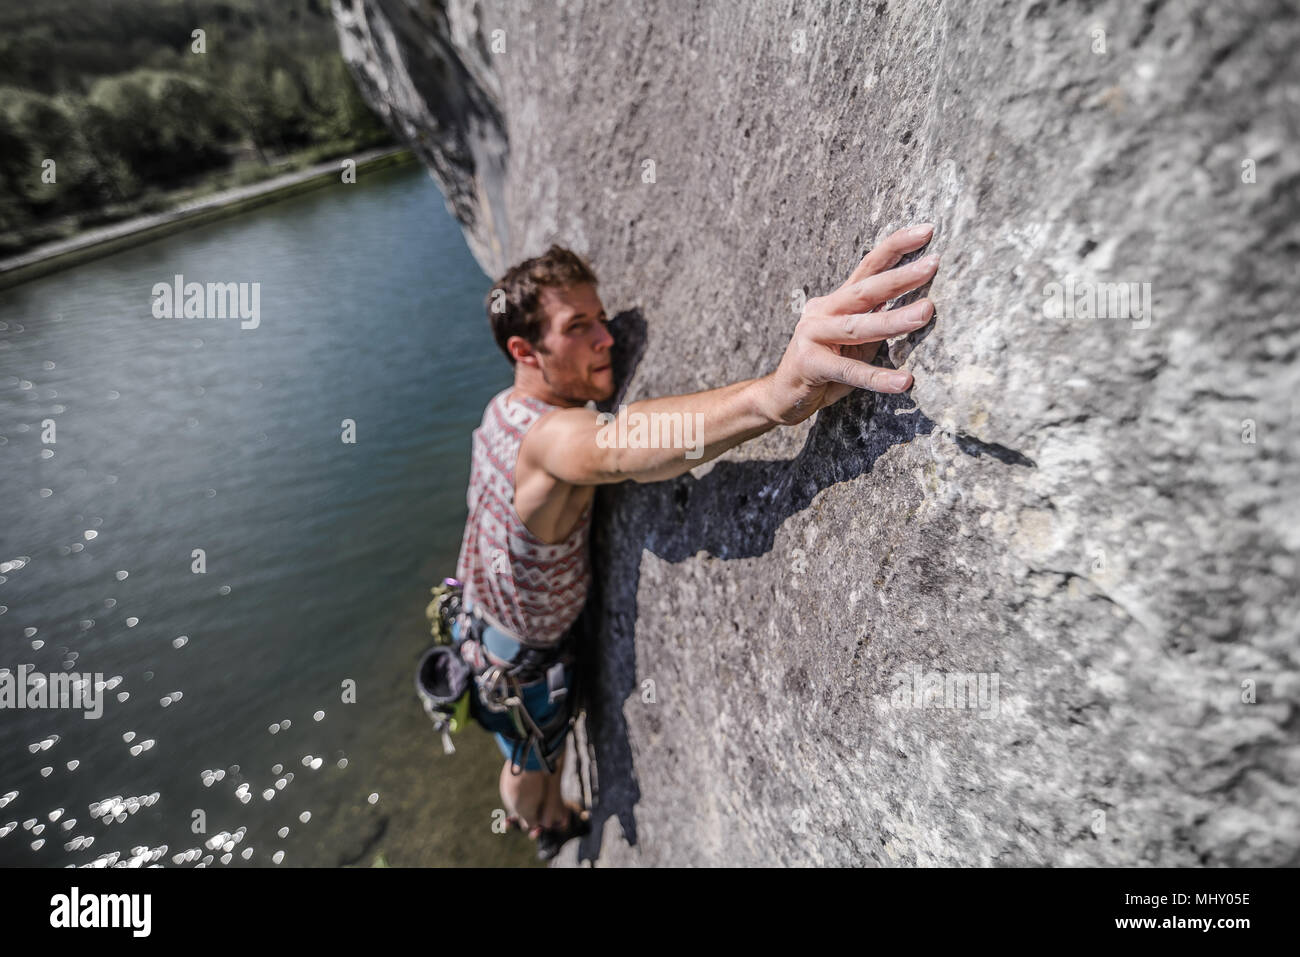 Young male rock climber reaching while climbing limestone rock face, Freyr, Belgium, elevated view Stock Photo